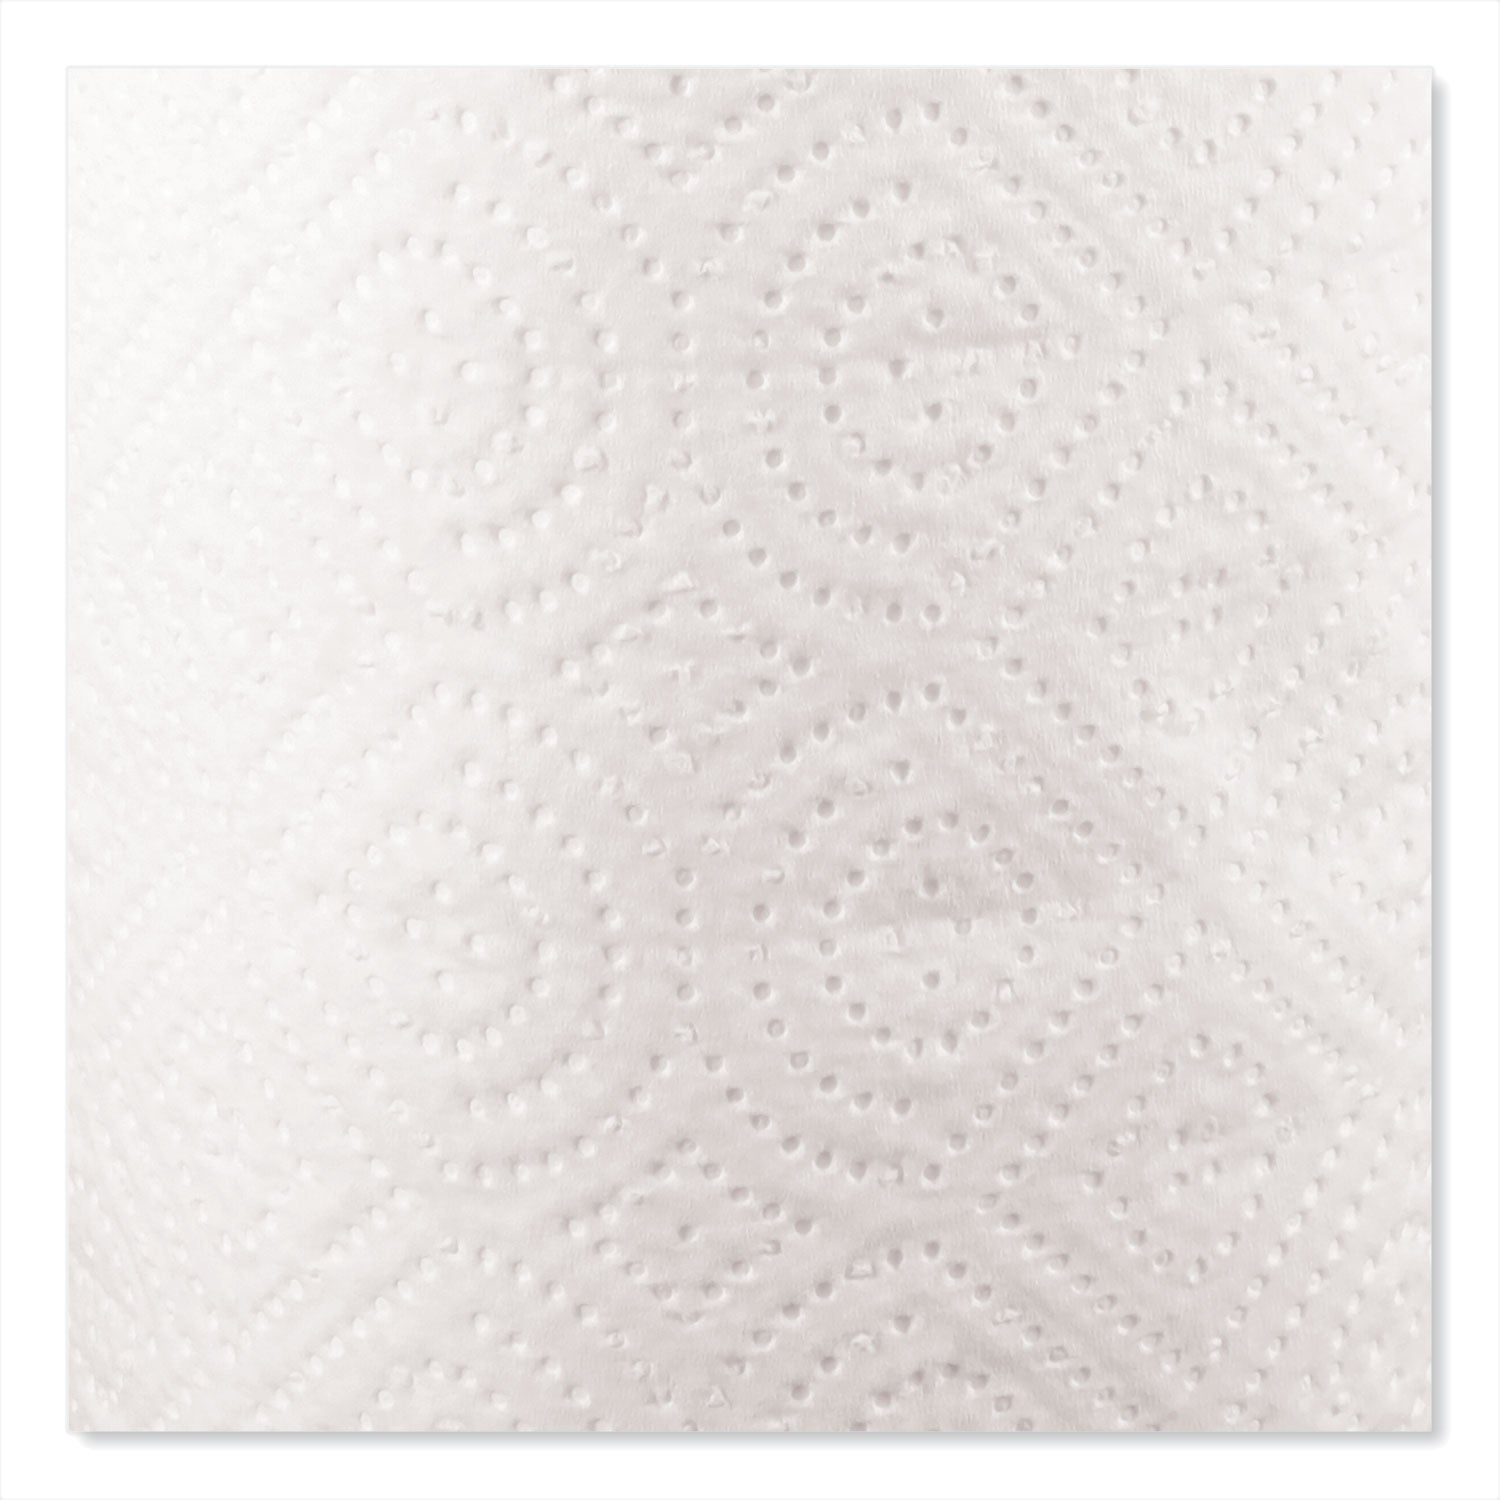 Kitchen Roll Towels, 2-Ply, 11 x 8.8, White, 100/Roll - 